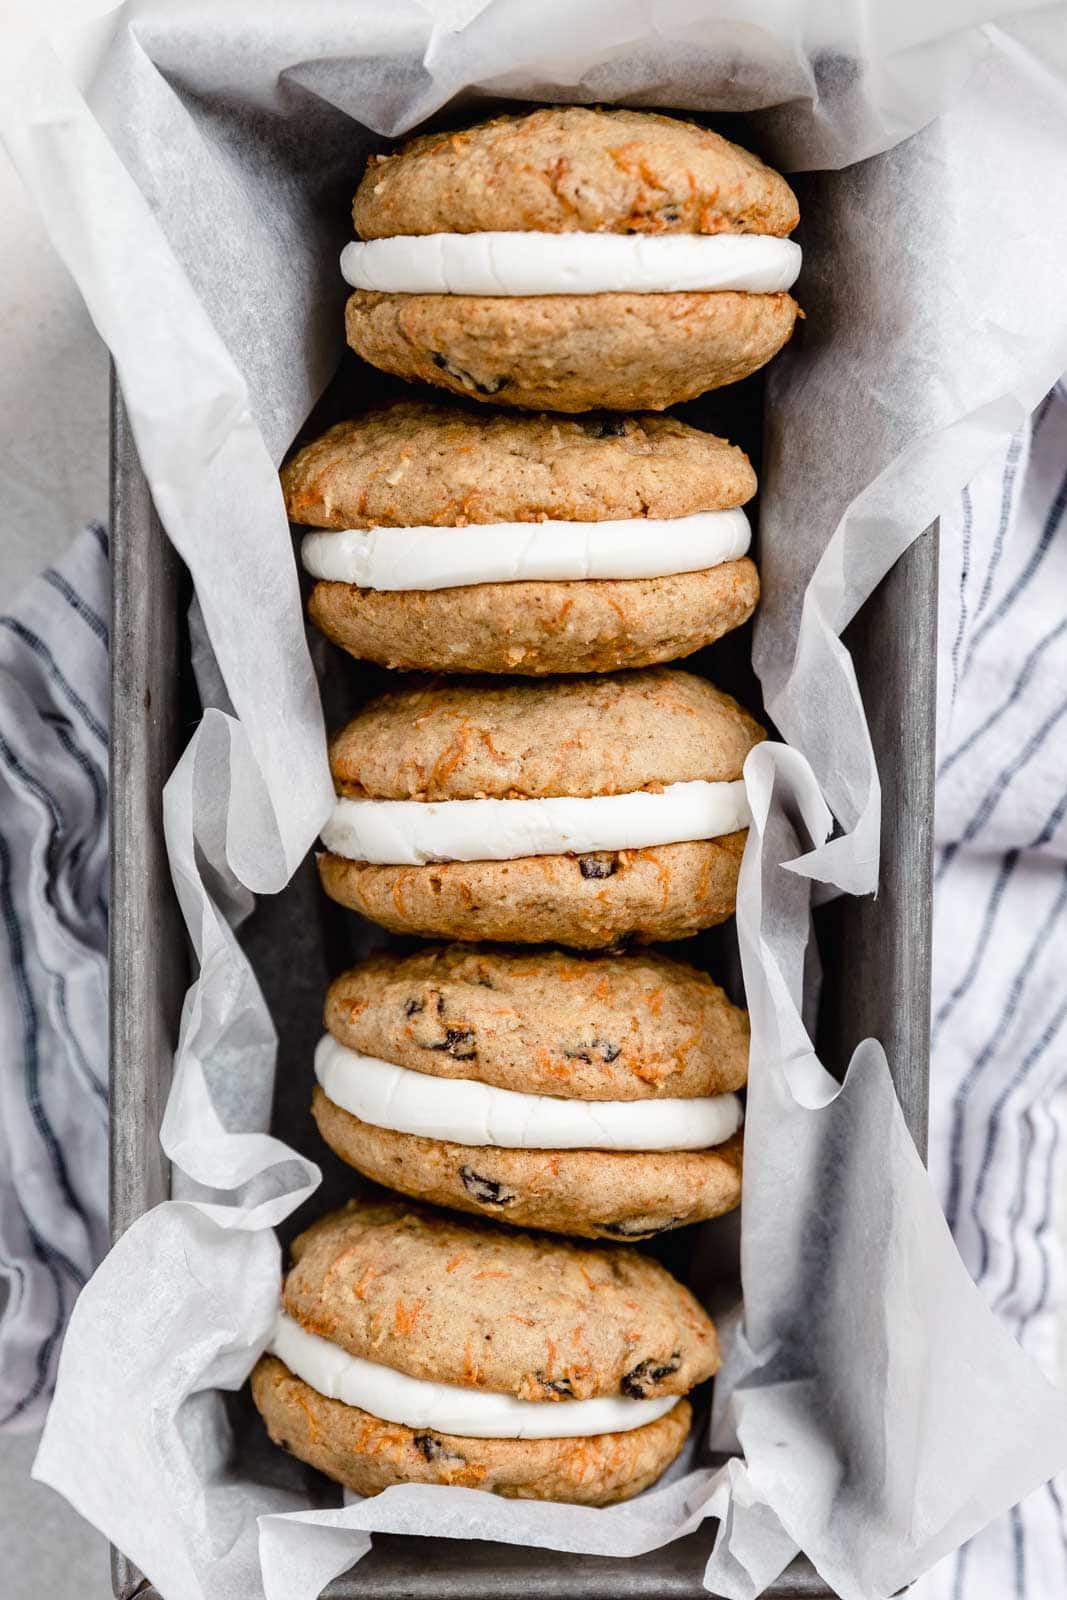 These carrot cake sandwich cookies take all your favorite flavors from classic carrot cake into a transportable sandwich. Perfect for Easter or any time!